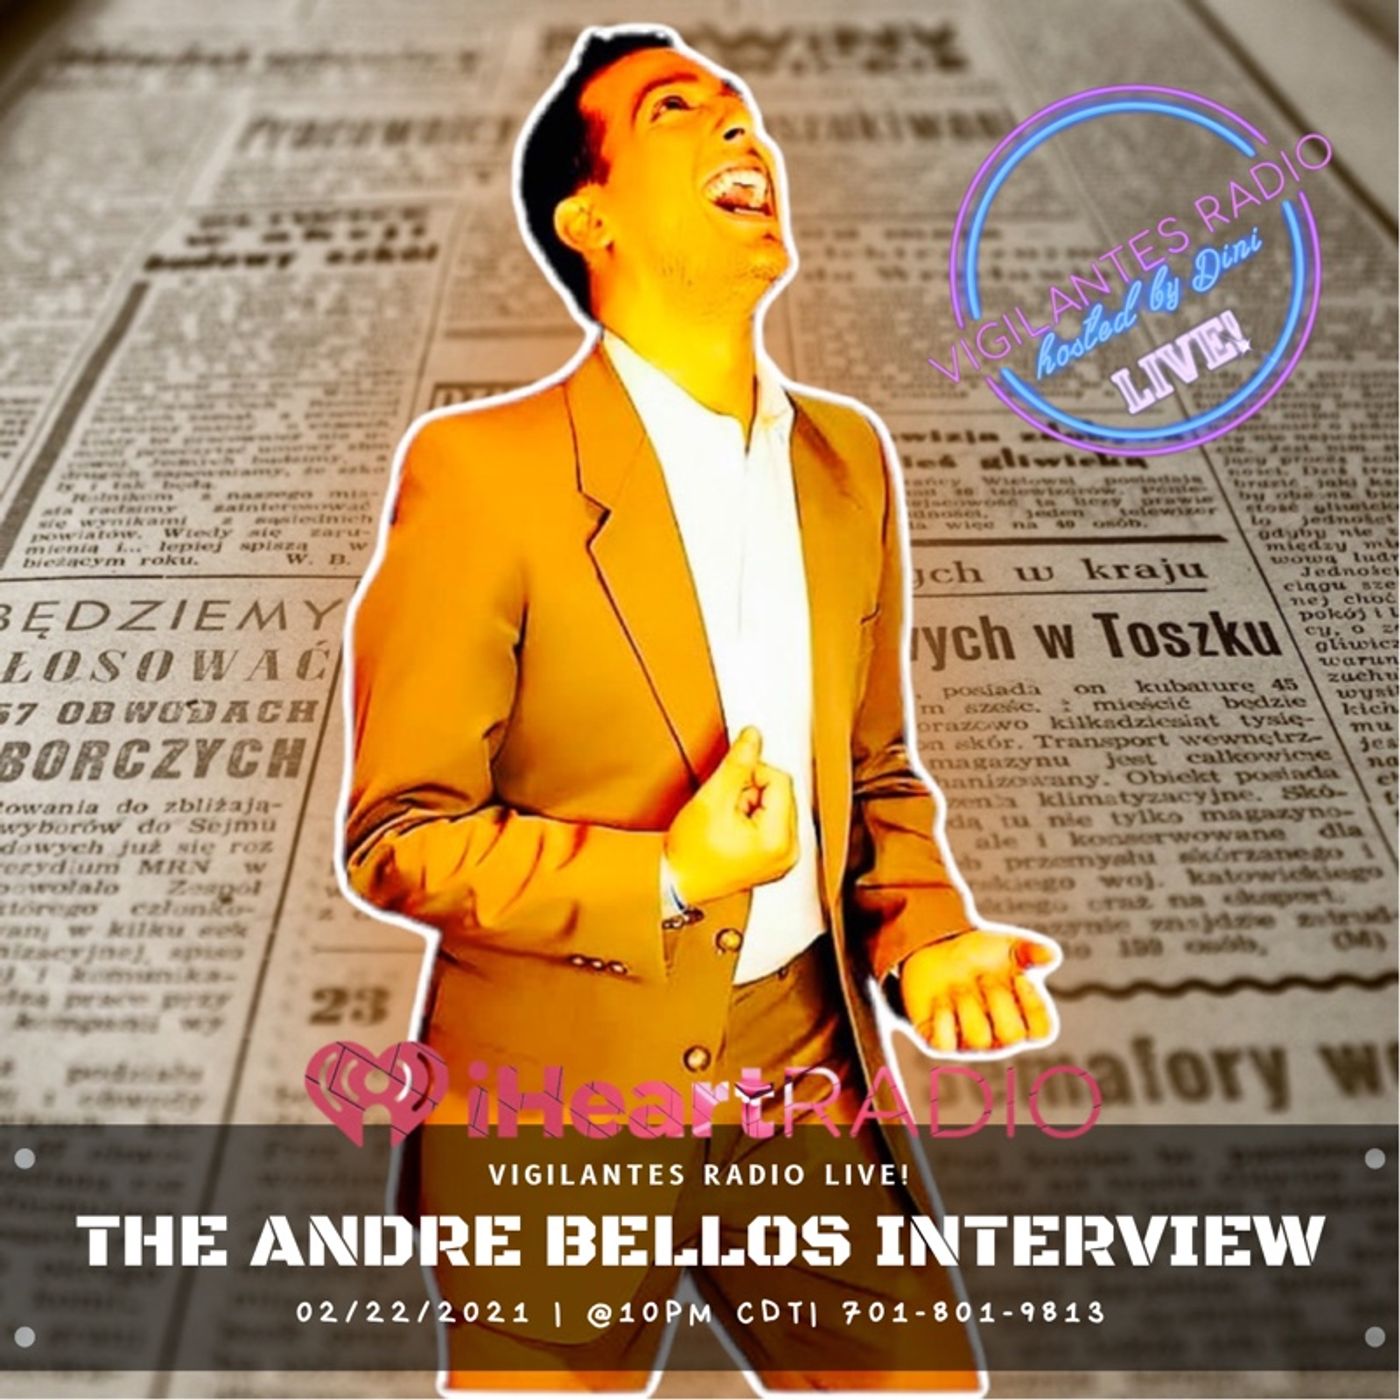 The Andre Bellos Interview. Image